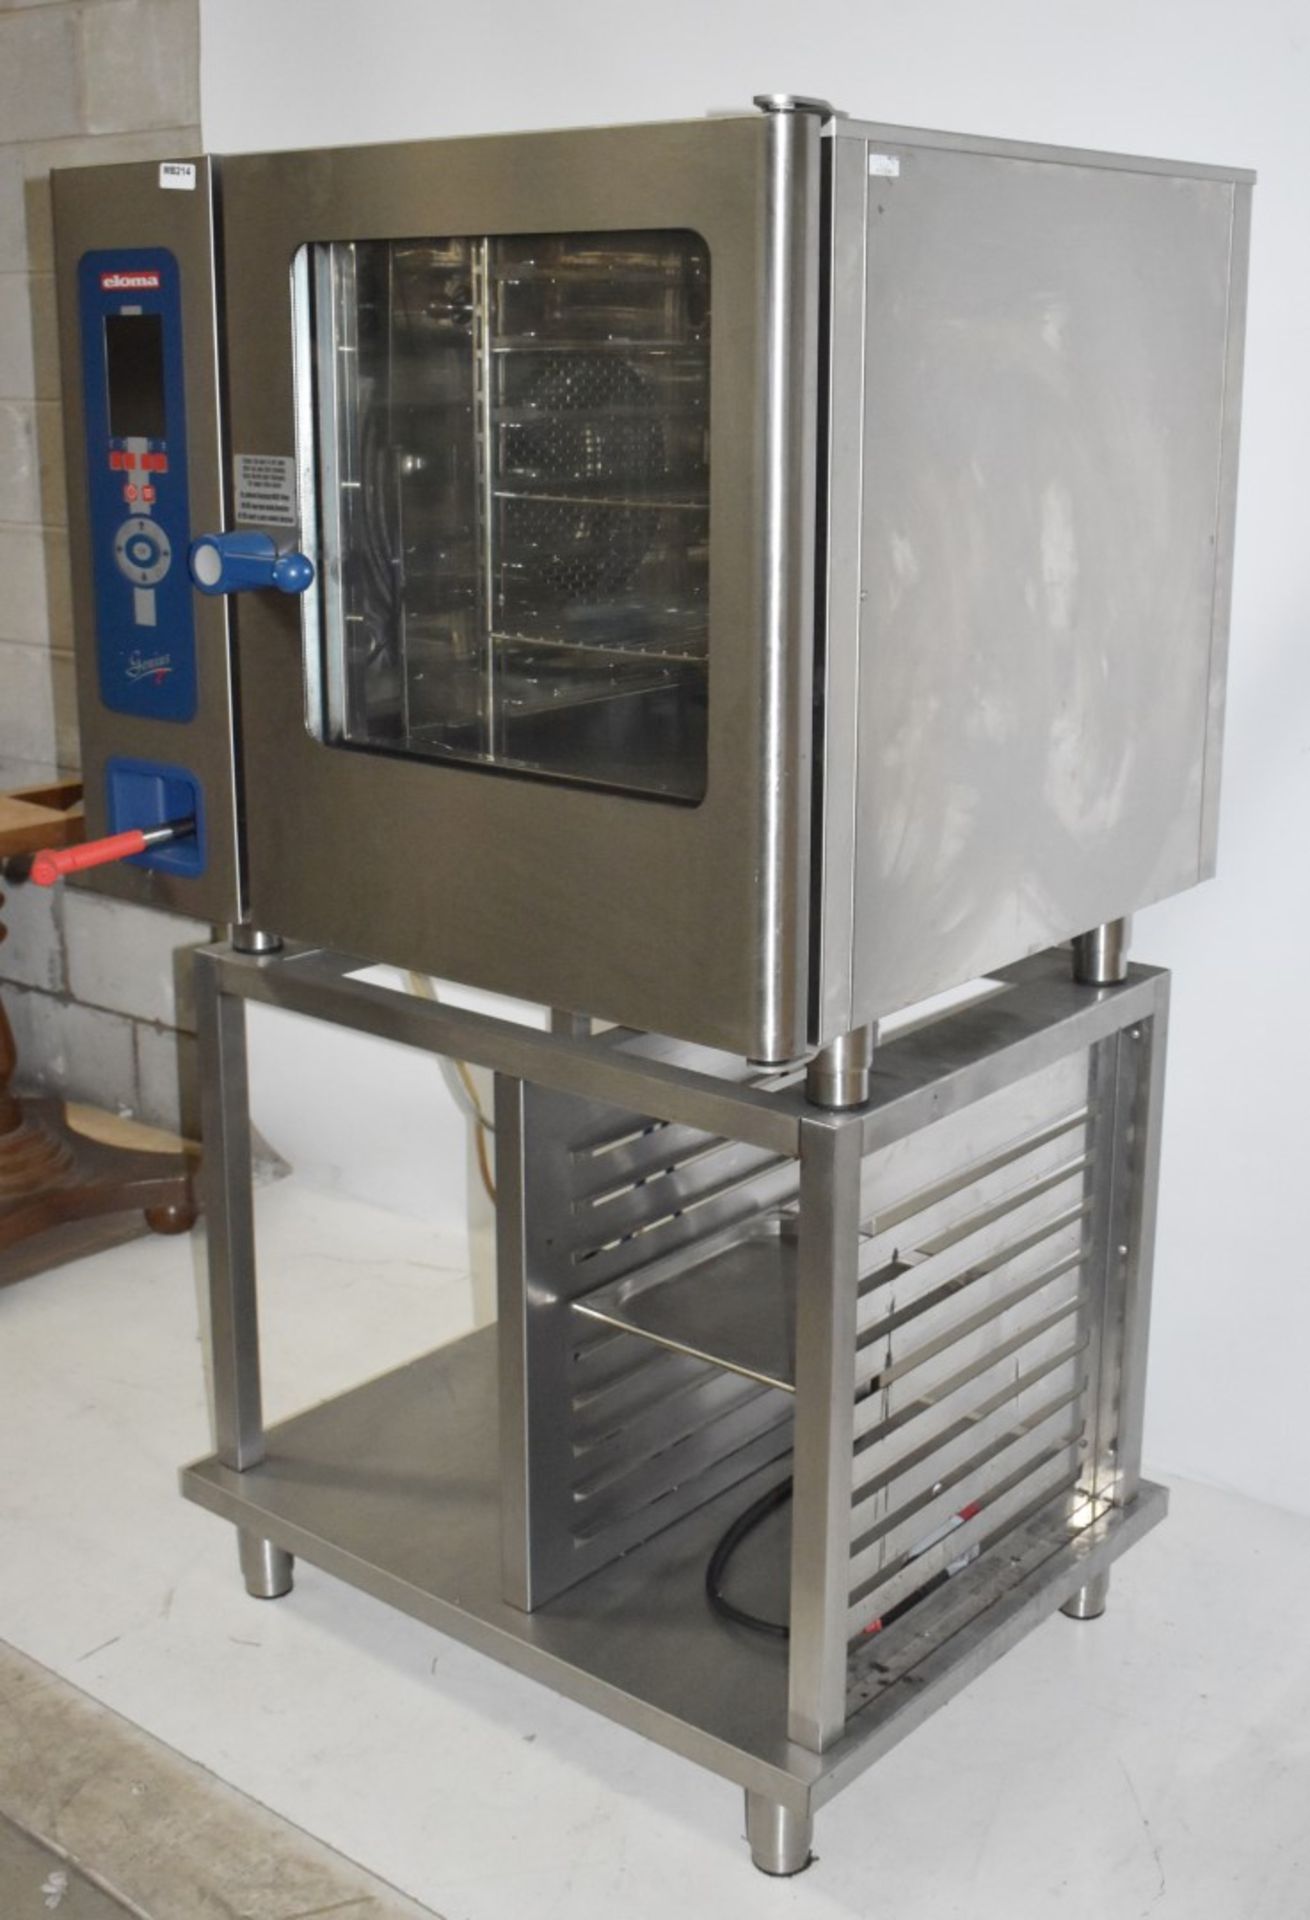 1 x Eloma Genius T 6-11 Combi  Steam 6 Grid Oven - H164 x W93 x D80 cms - 3 Phase Power - CL453 - - Image 2 of 15